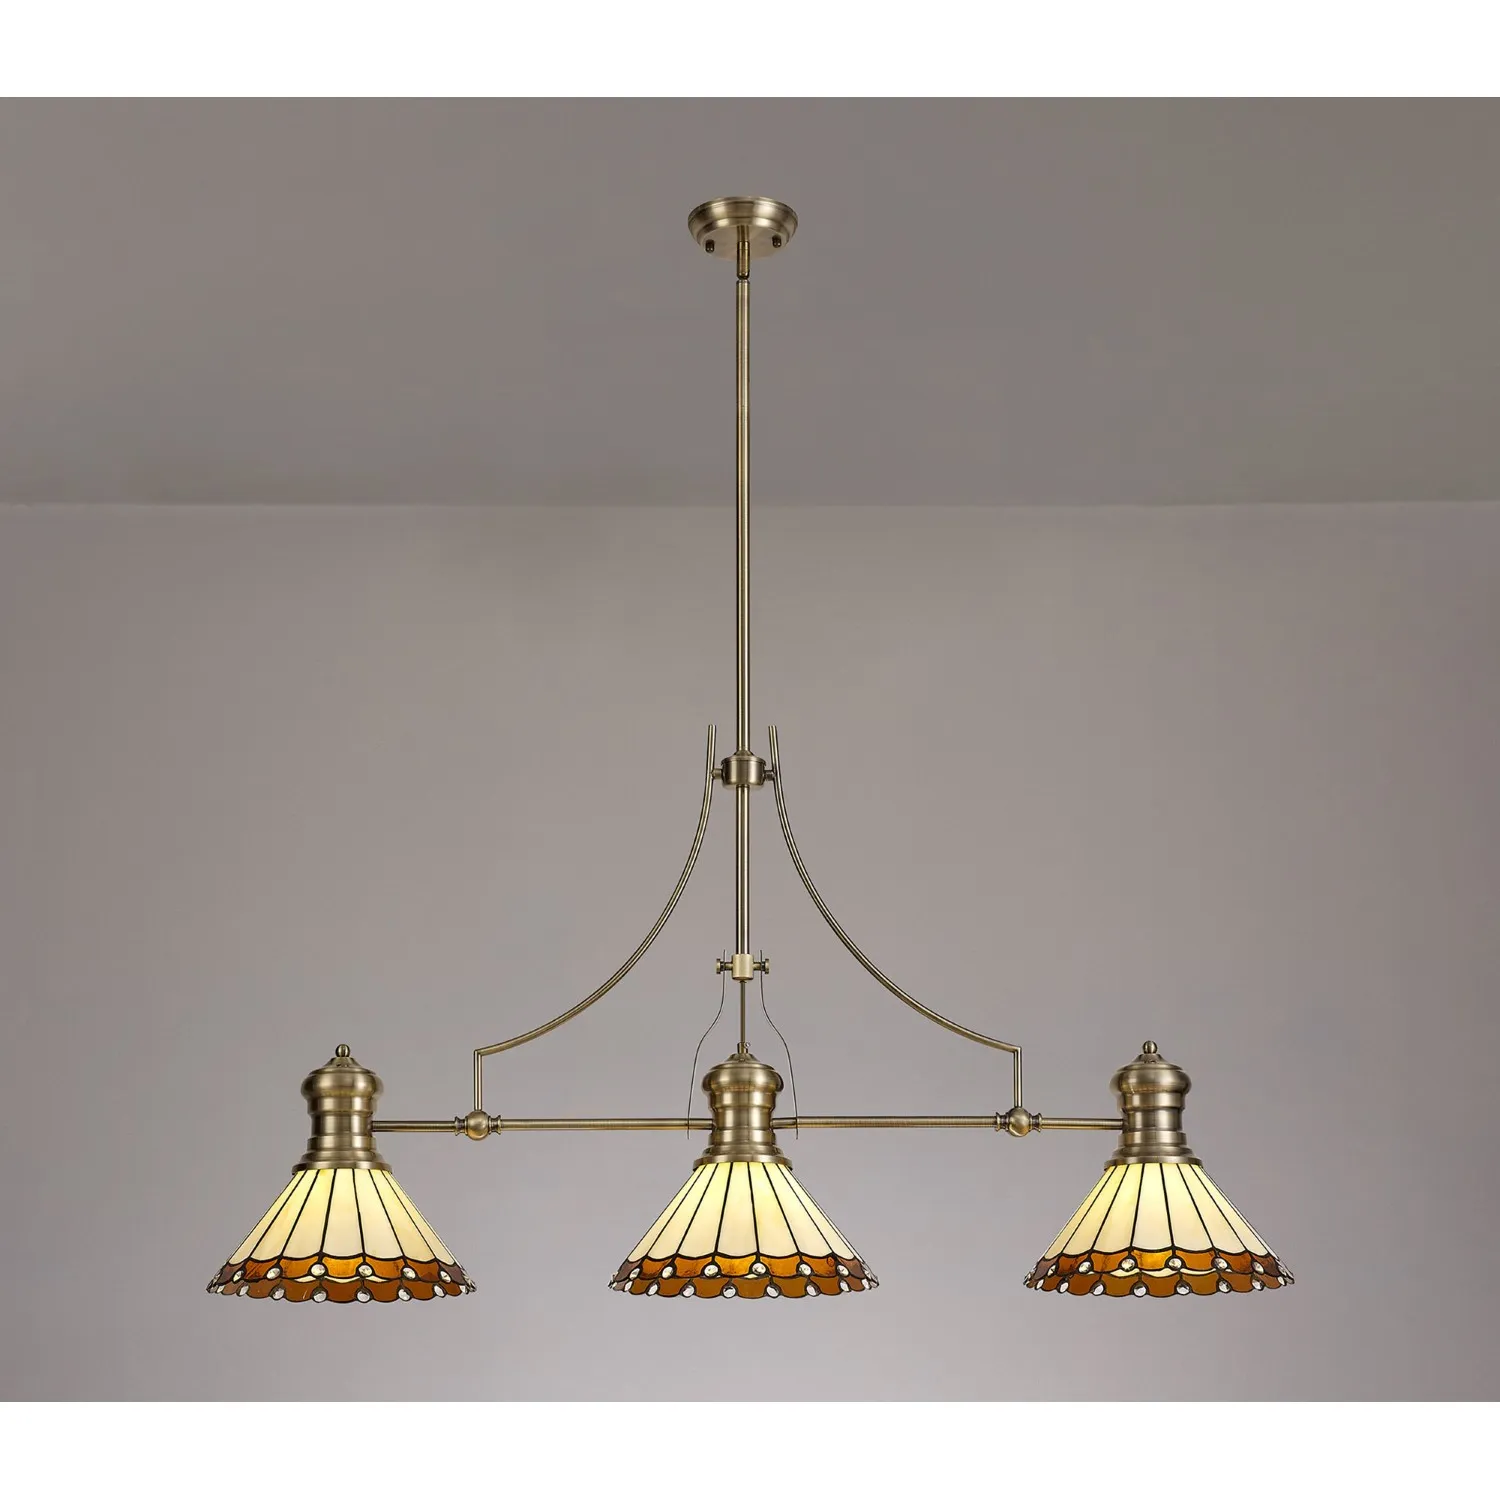 Ware 3 Light Linear Pendant E27 With 30cm Tiffany Shade, Antique Brass, Amber, Cream, Crystal